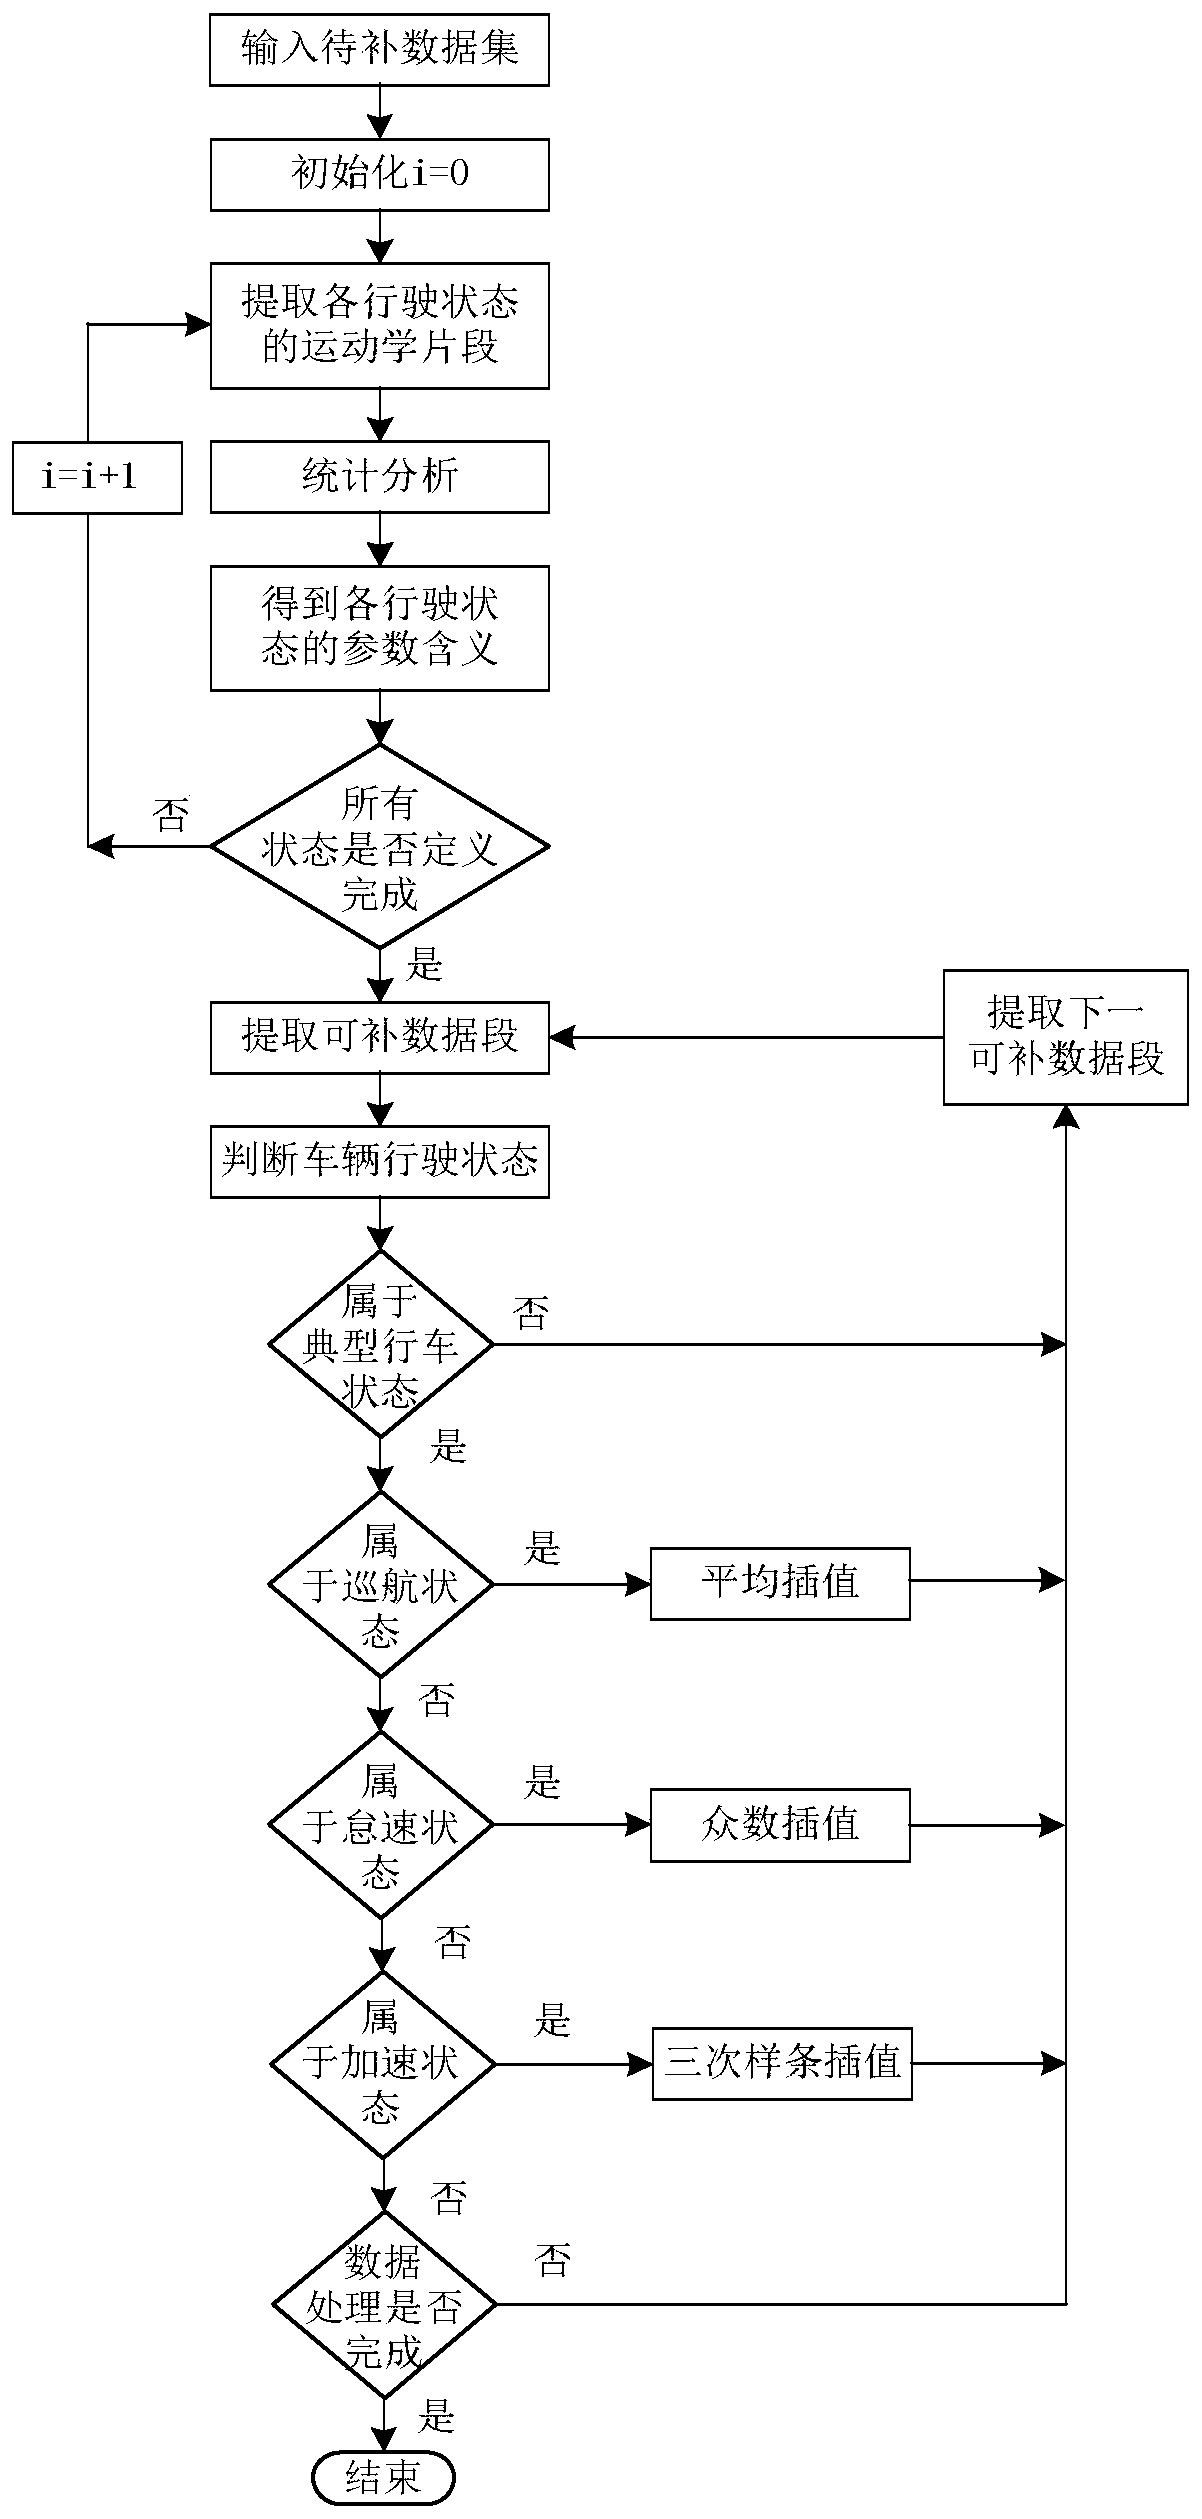 Automobile kinematics fragment extraction and working condition diagram synthesis method